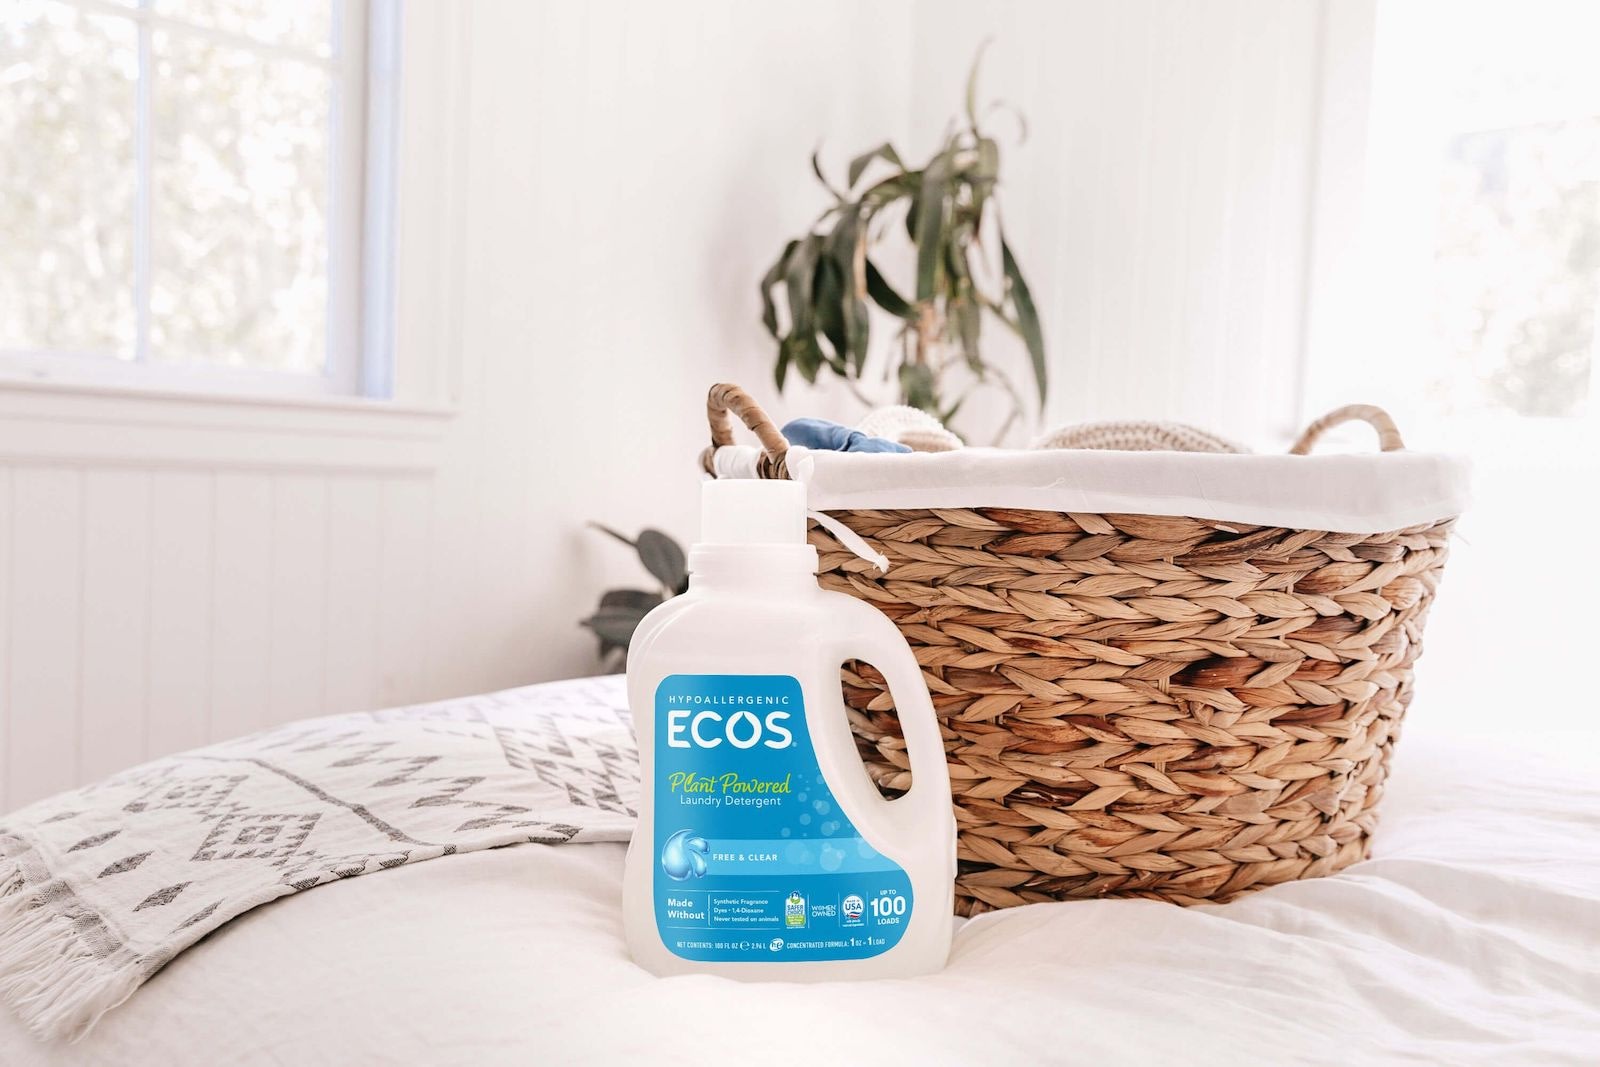 Free & Clear Liquid Detergent on Bed with Laundry Basket